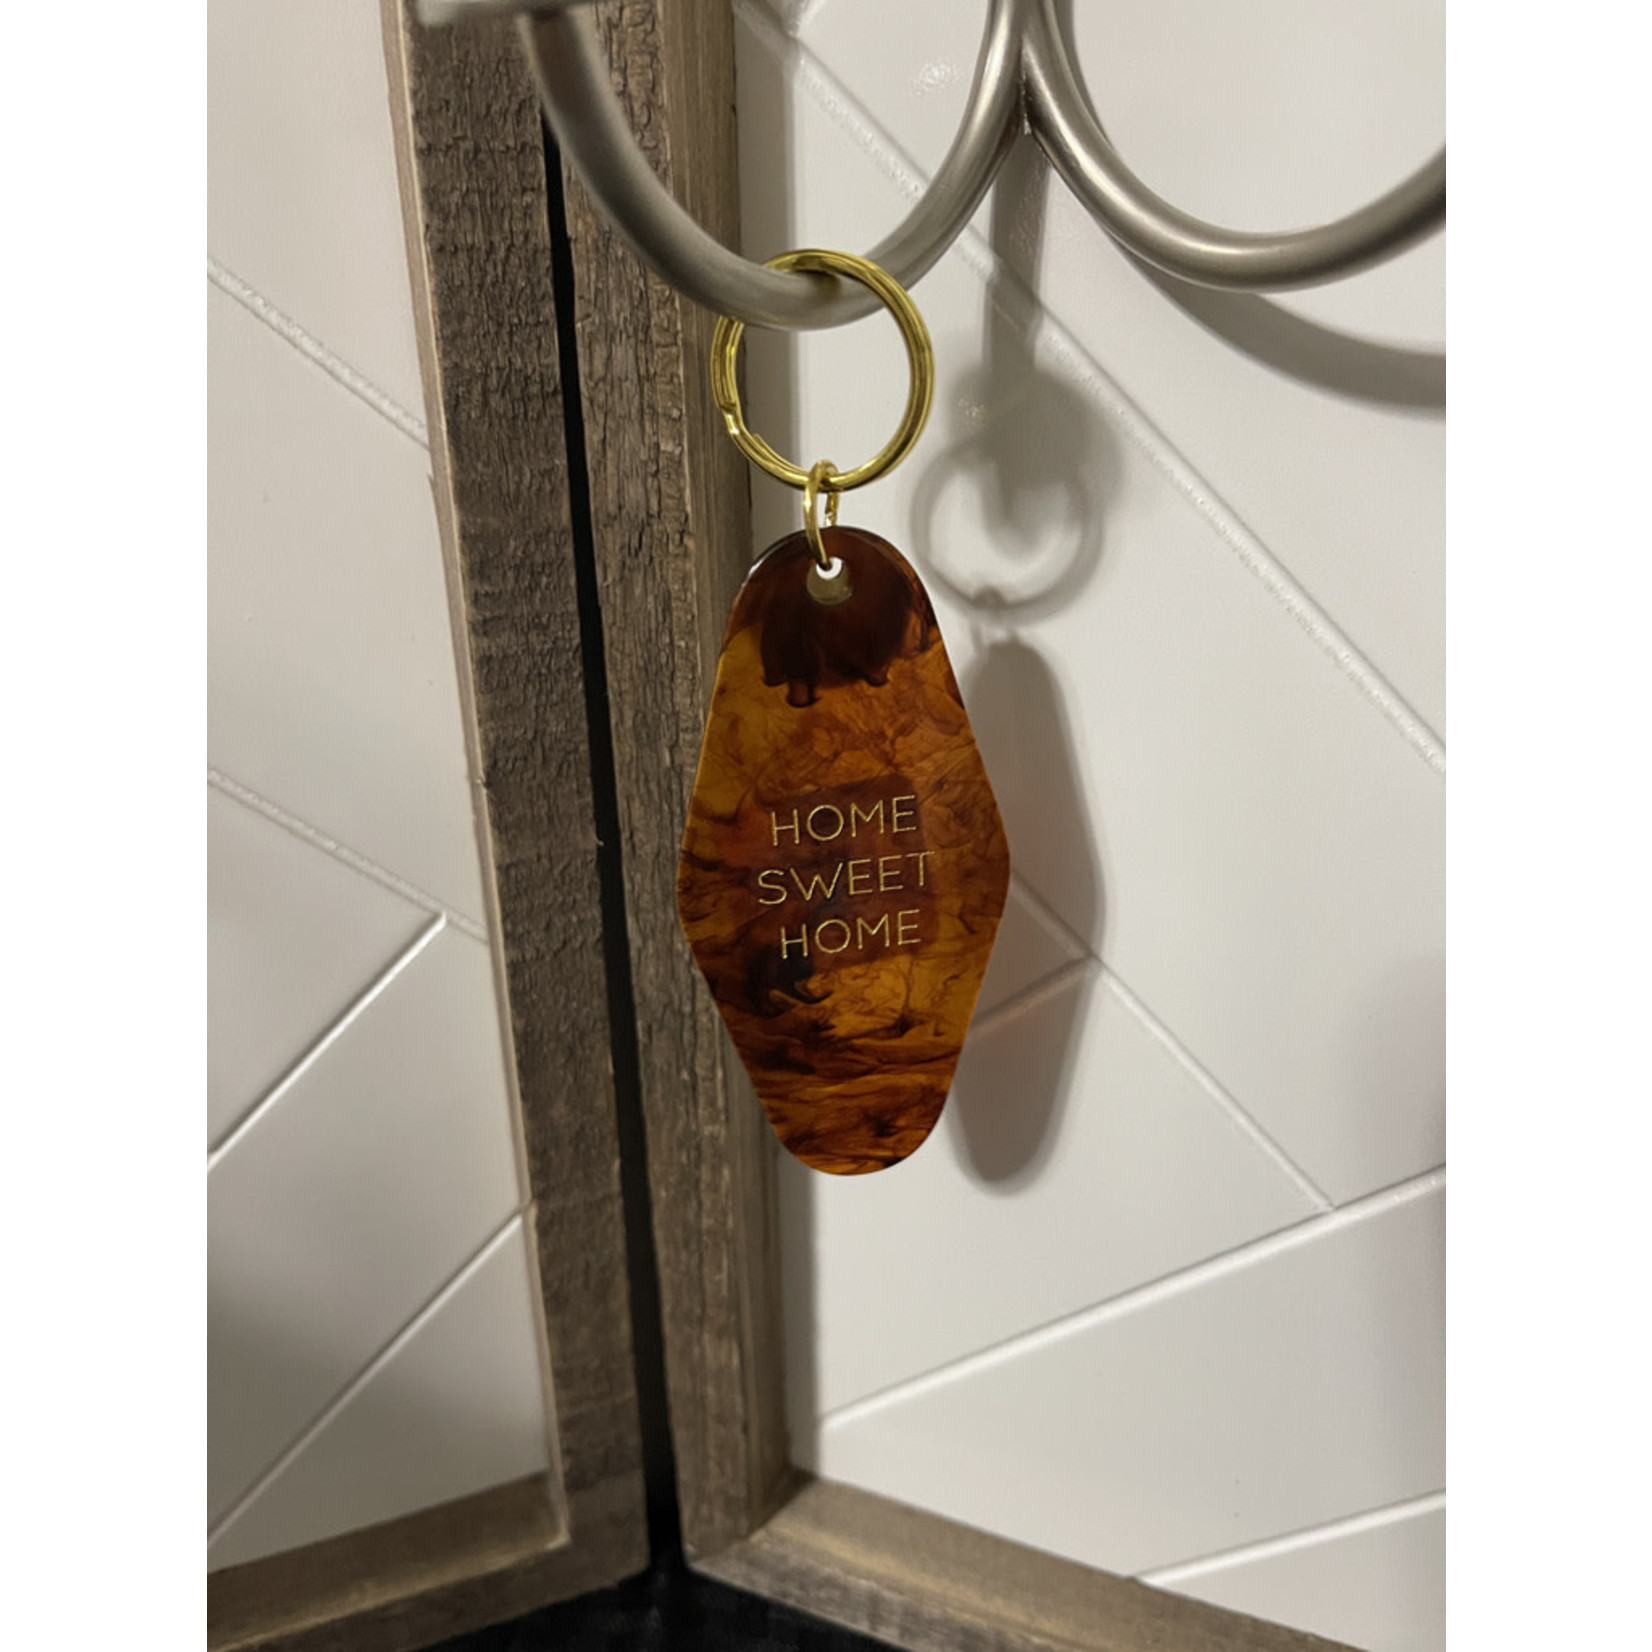 Field Study "Home Sweet Home" Gold and Brown Keychain